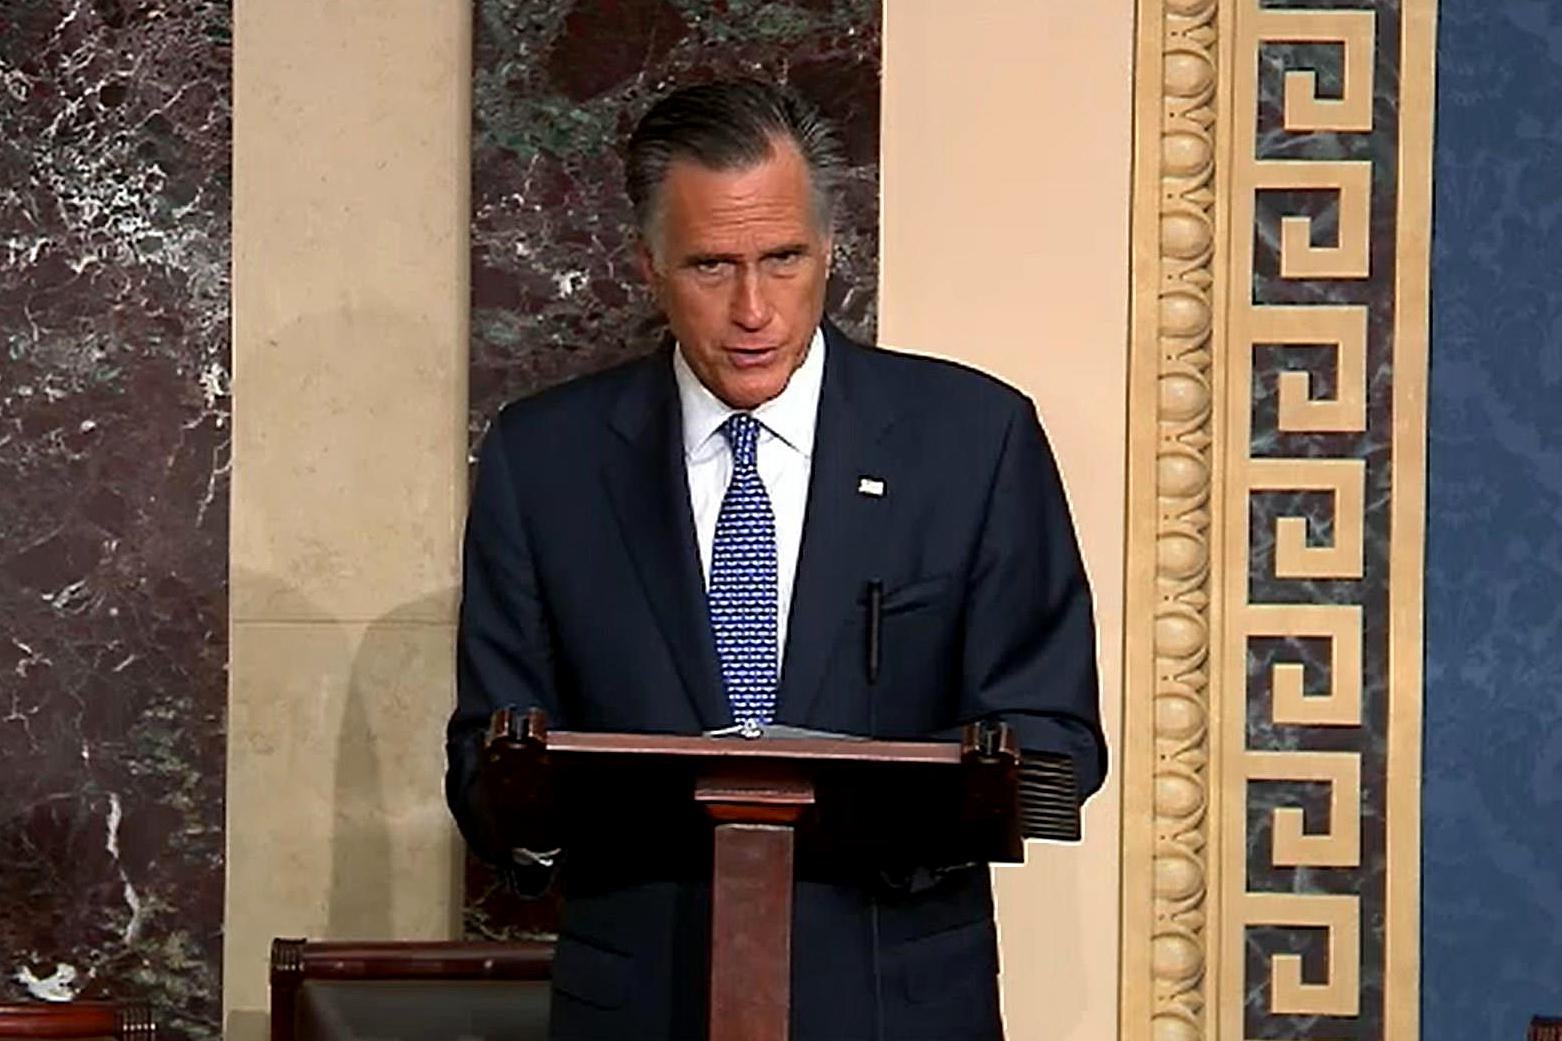 Romney speaks at a podium, looking solemn, in the Senate chamber.